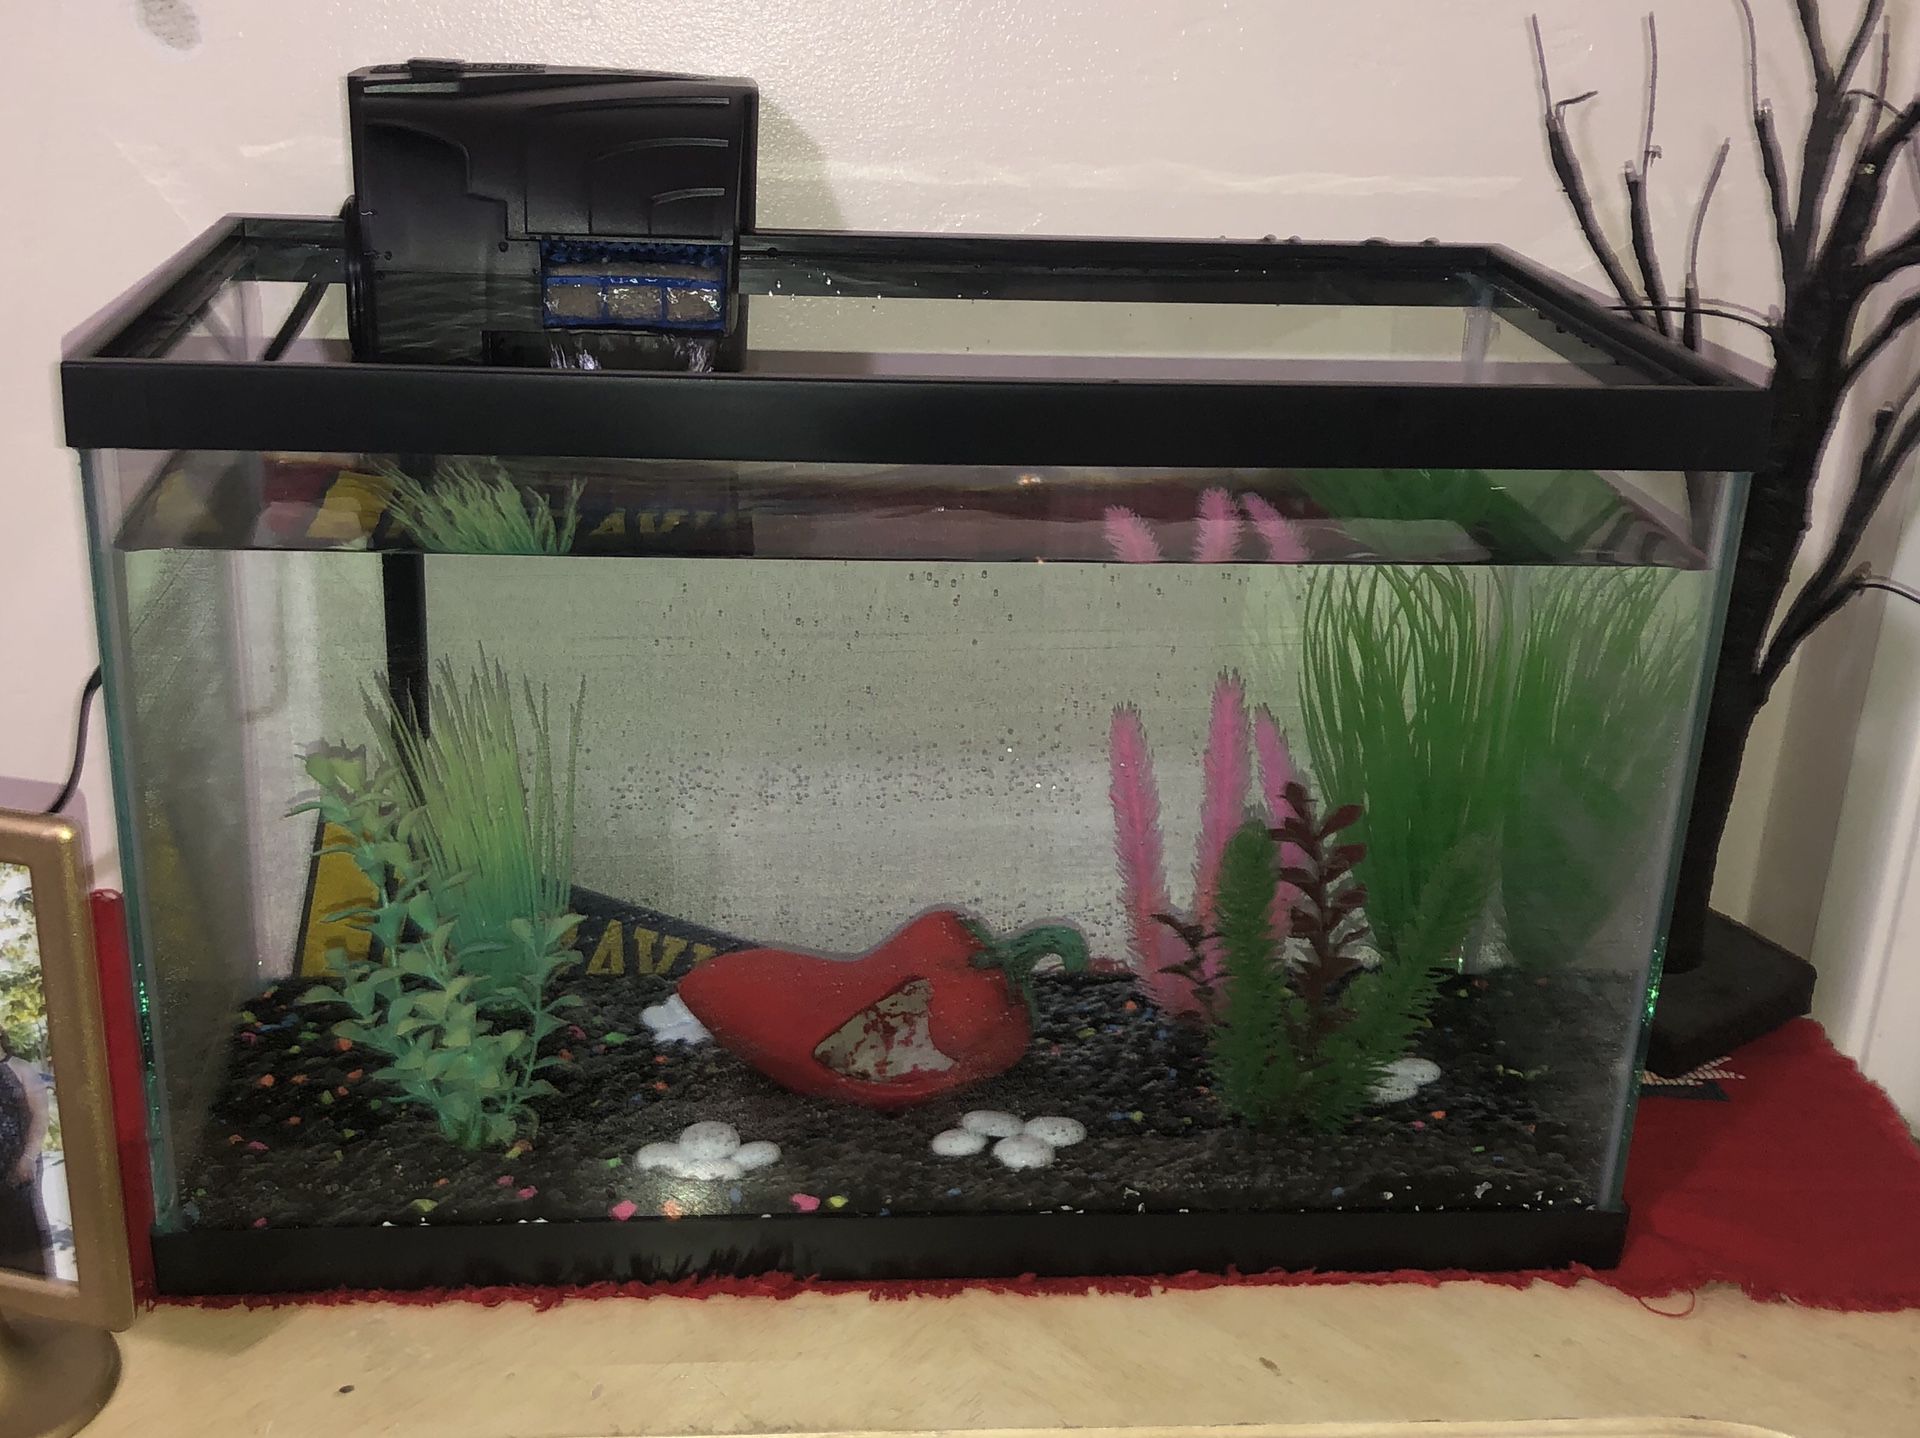 10 Gallon fish tank with Aquarium Hood Light also with Quiet Flow Filter and with Plastic Plants.